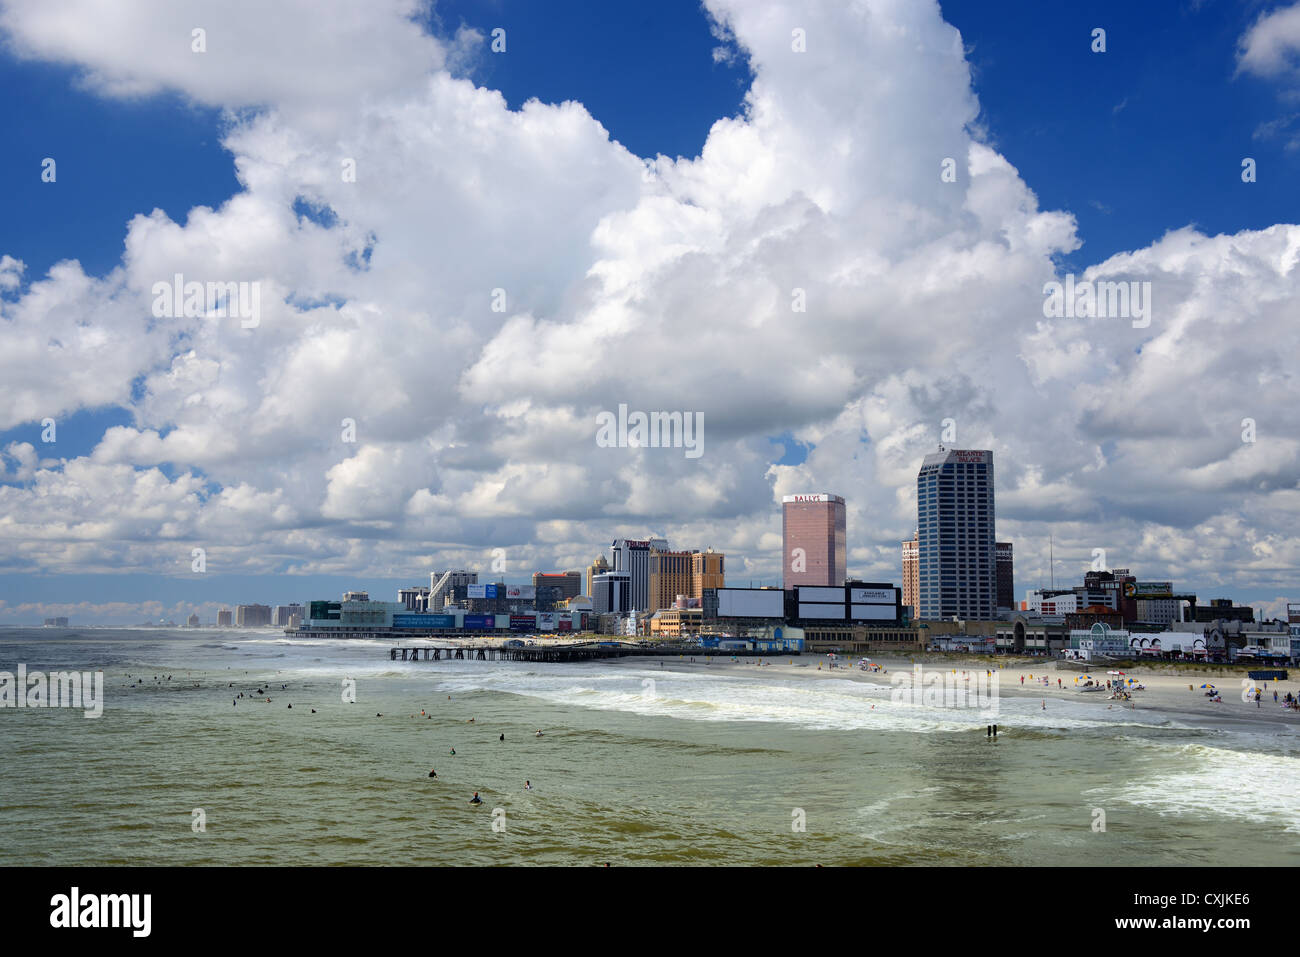 Atlantic City, New Jersey Skyline with building logos visible. Stock Photo